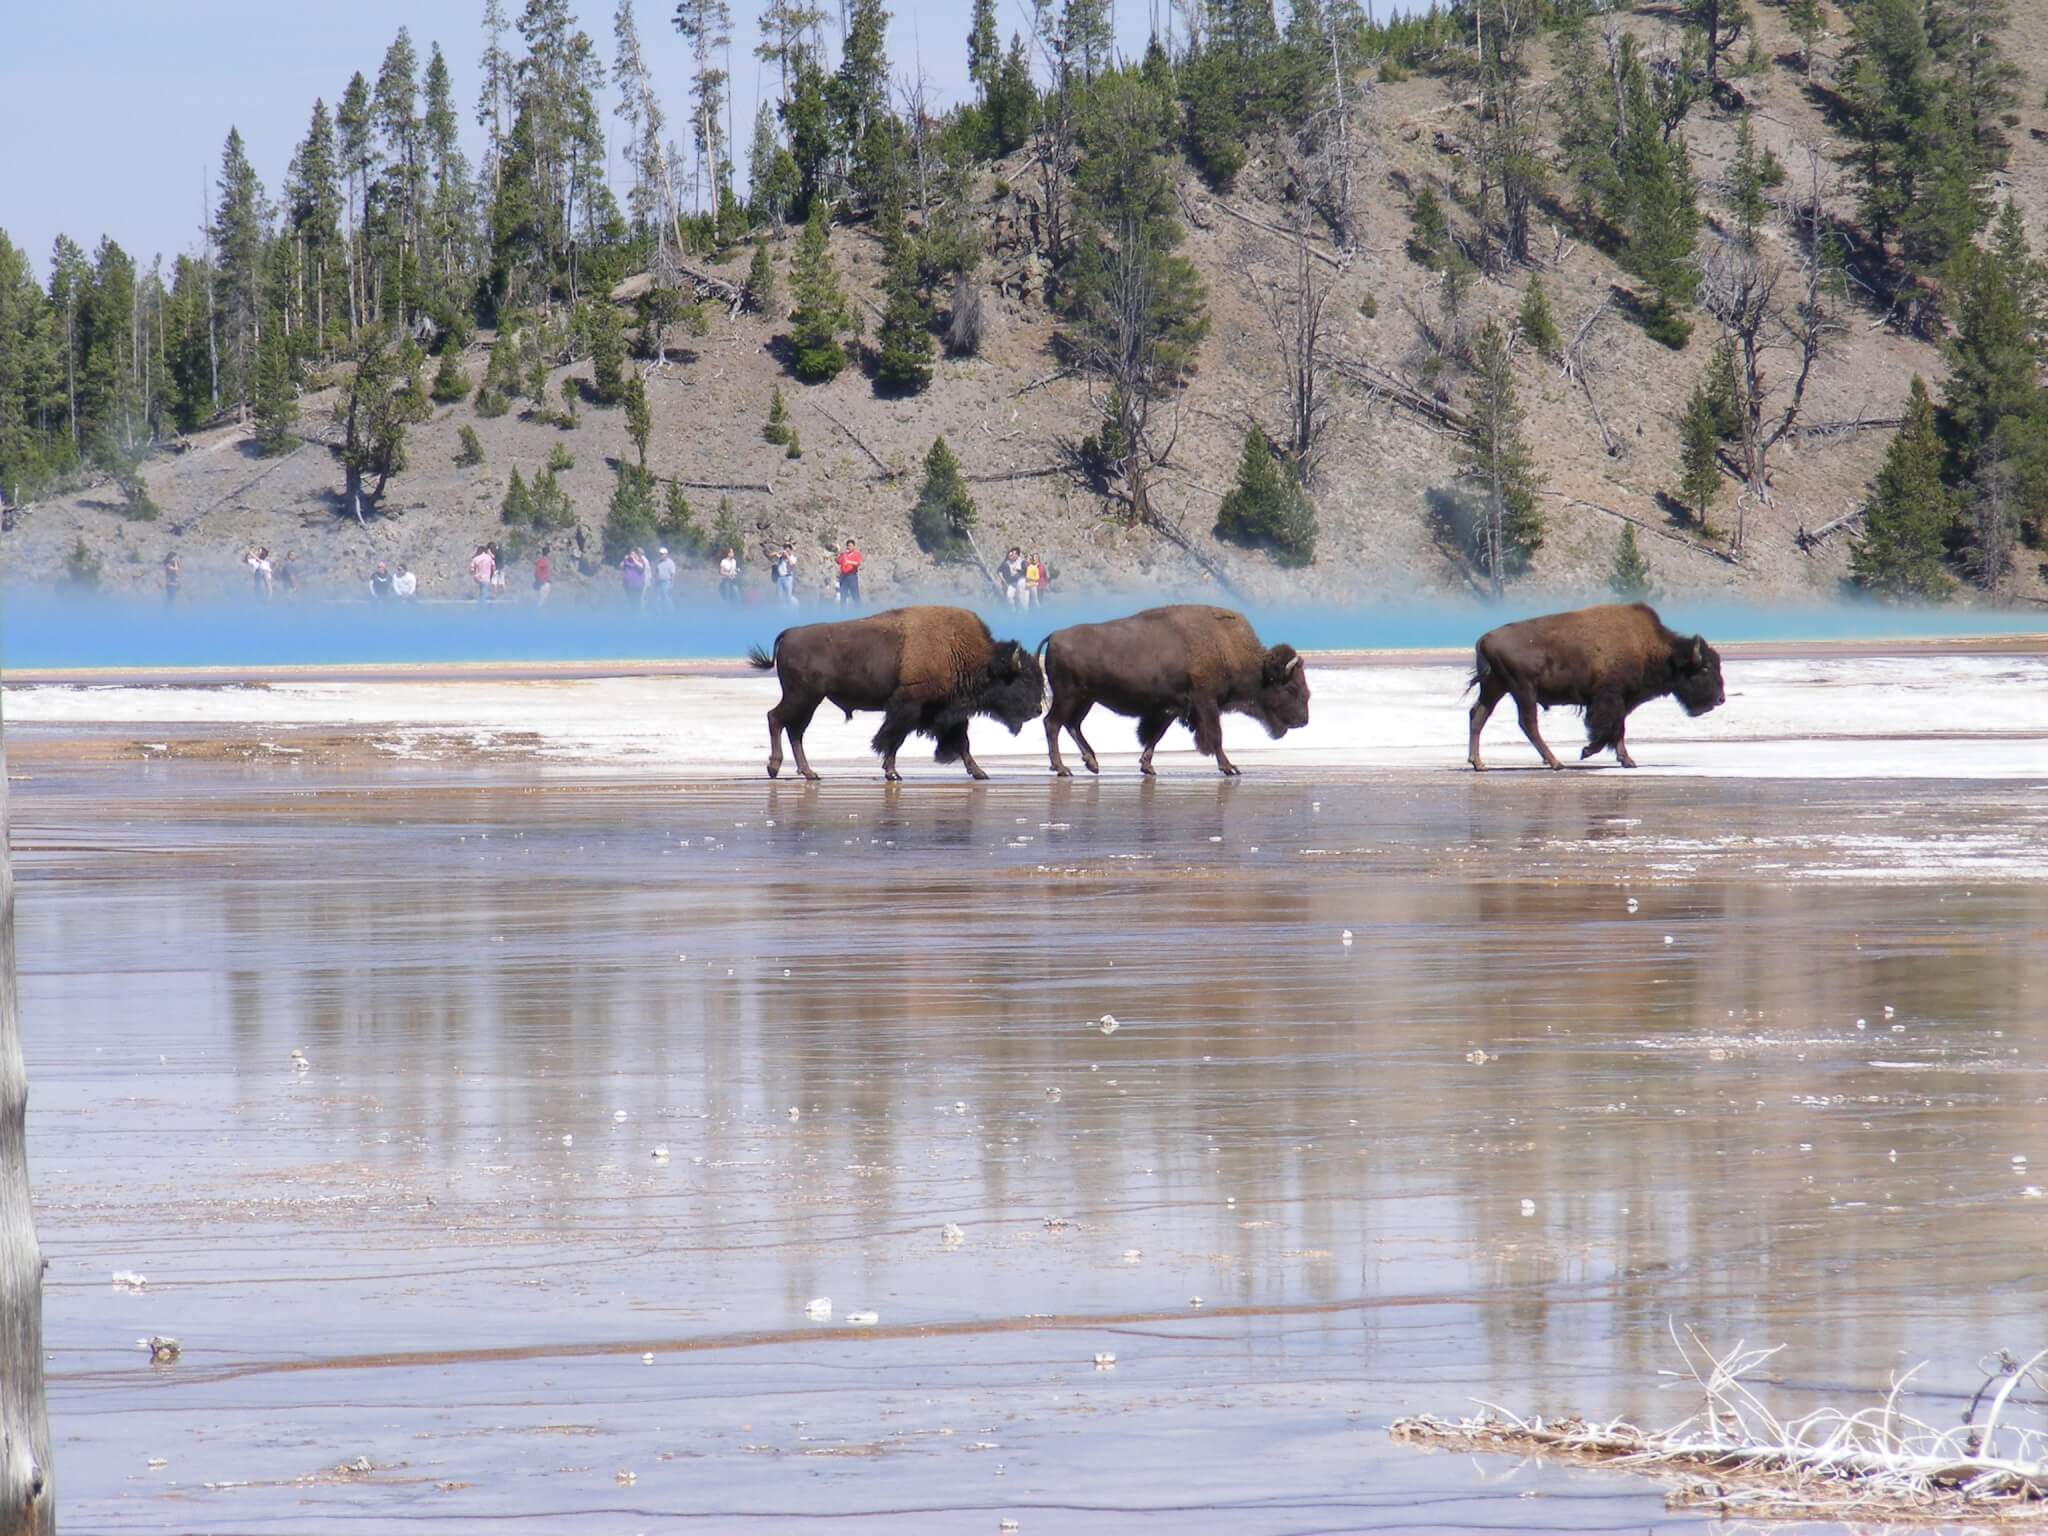 Bison at Yellowstone National Park